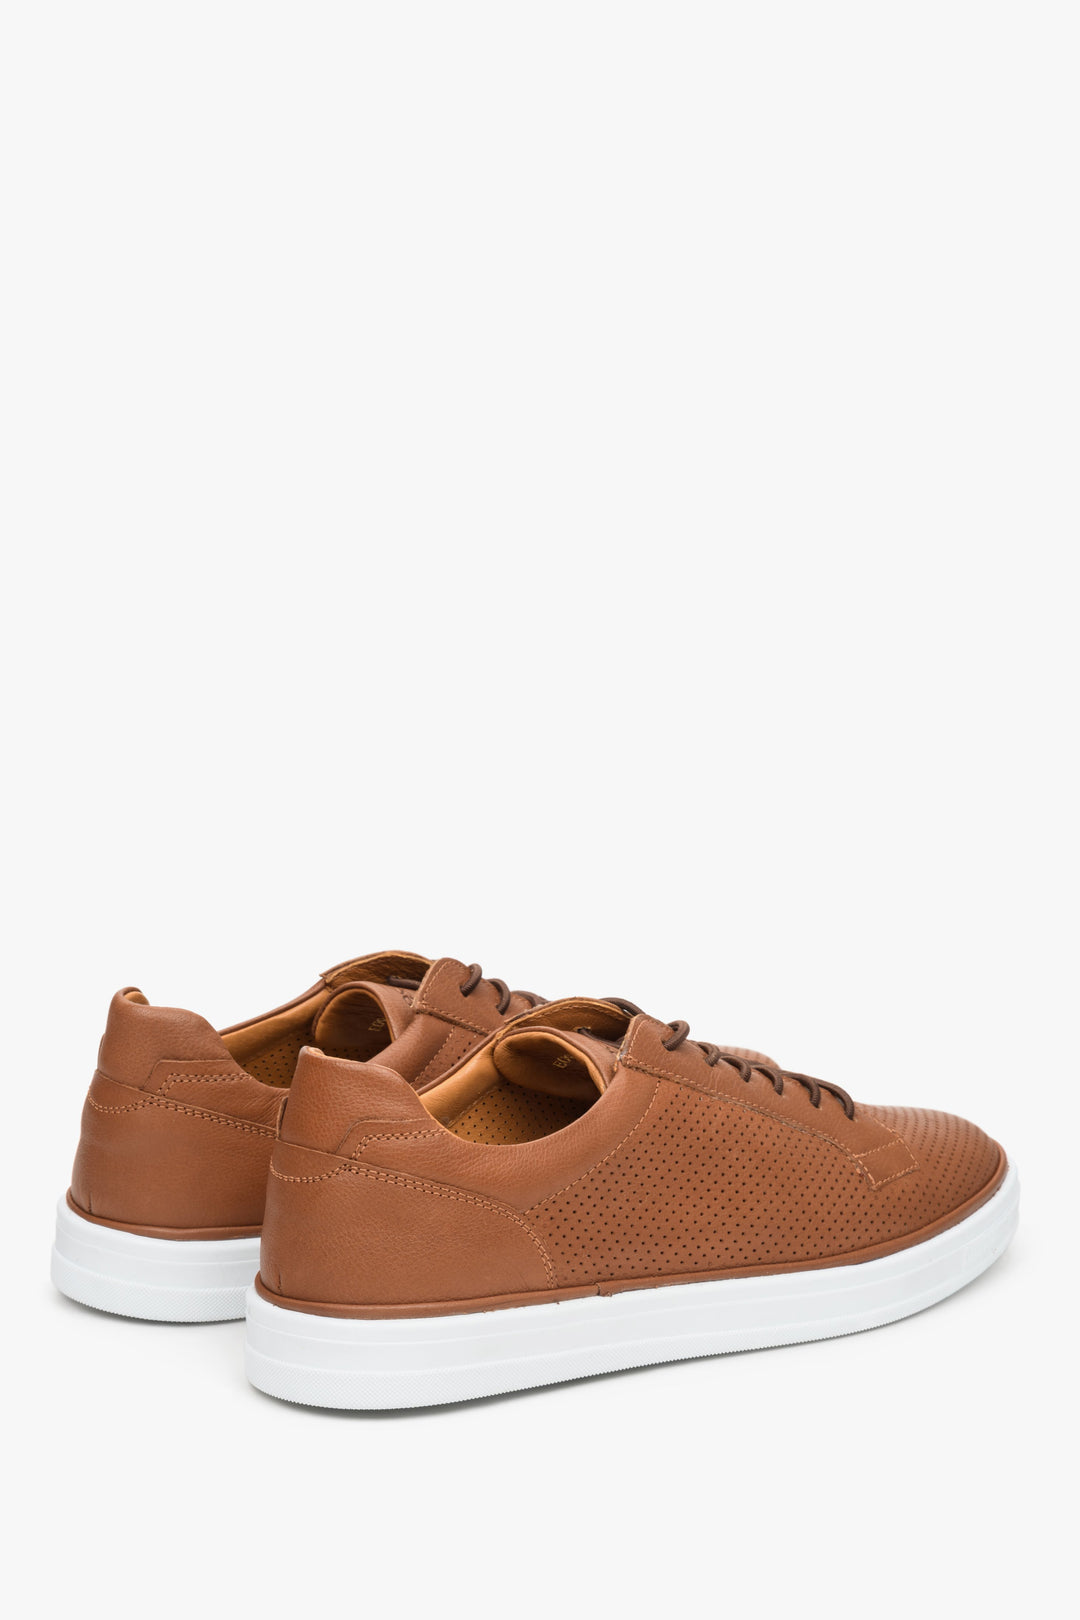 Brown men's natural leather sneakers for summer with perforations - close-up on the sideline of the shoe.